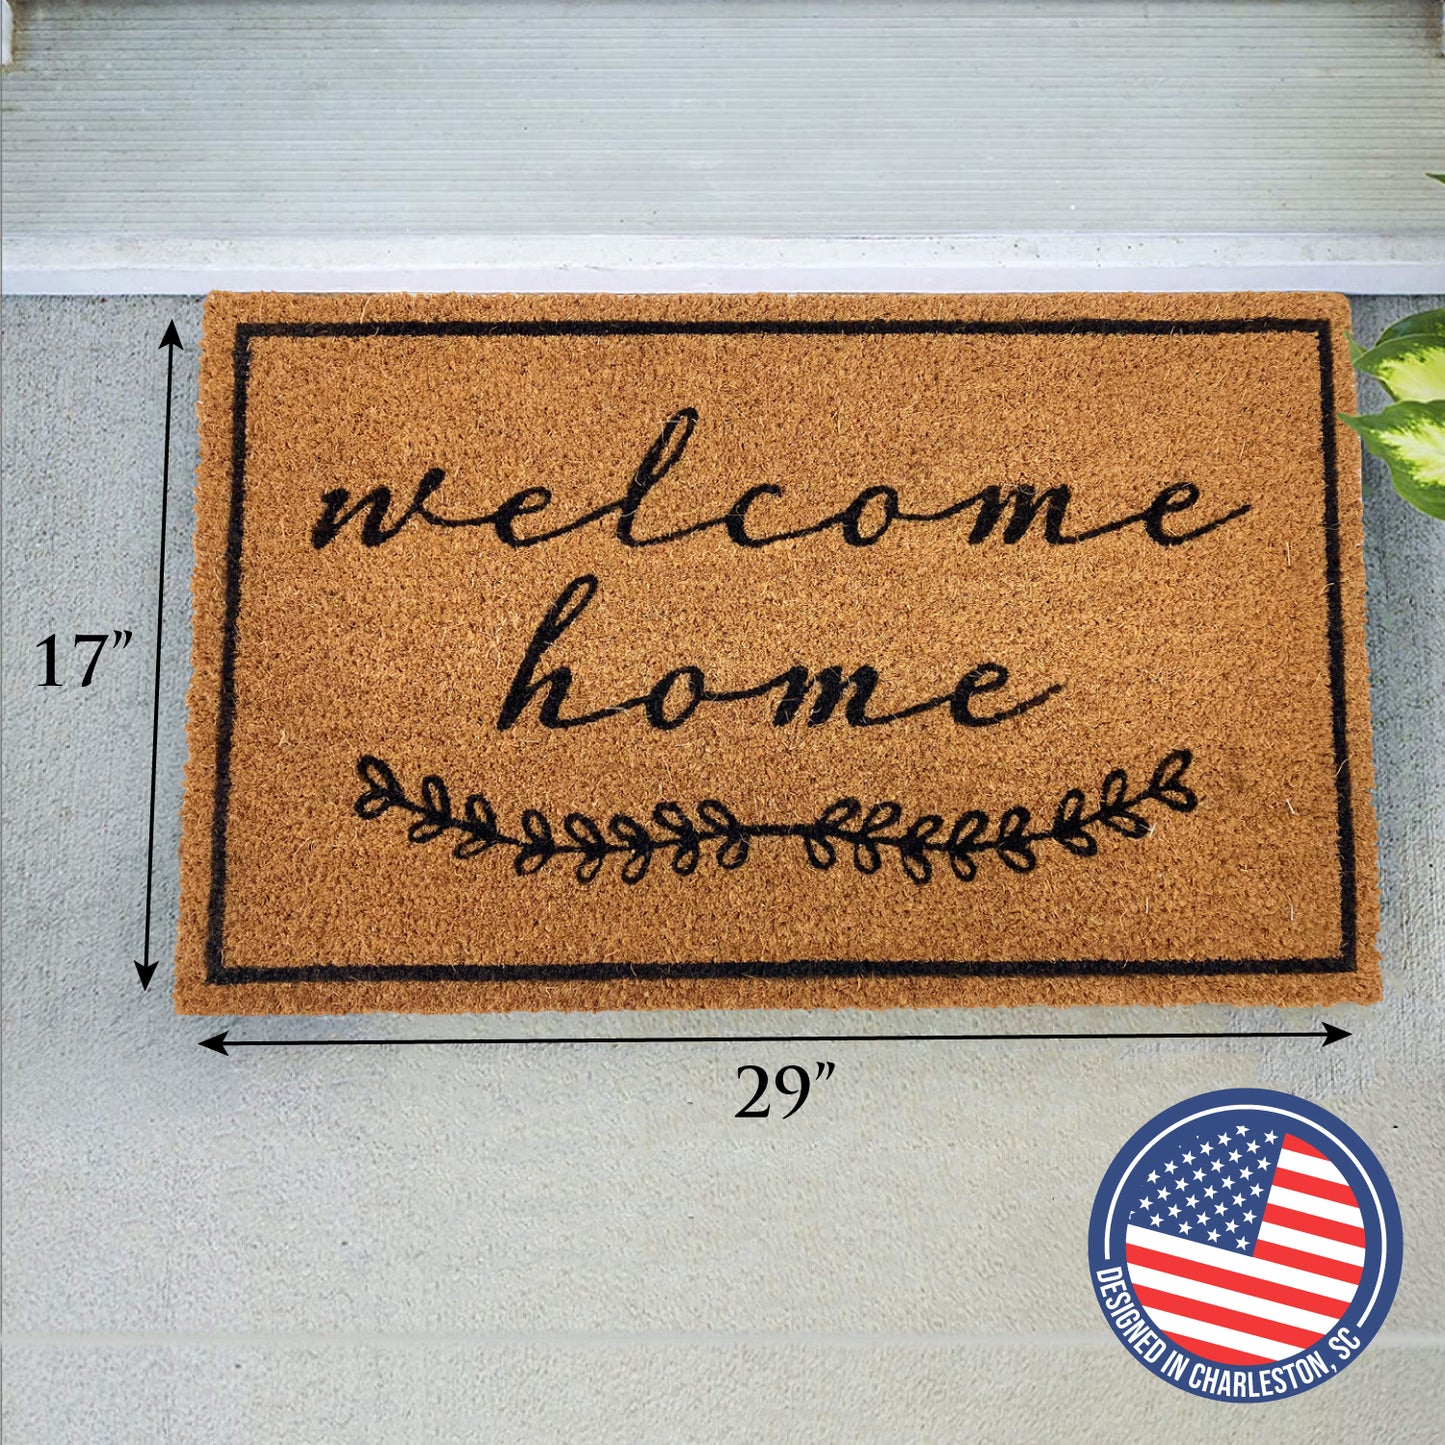 Avera Products "Welcome Home" Black Border Everyday Doormat